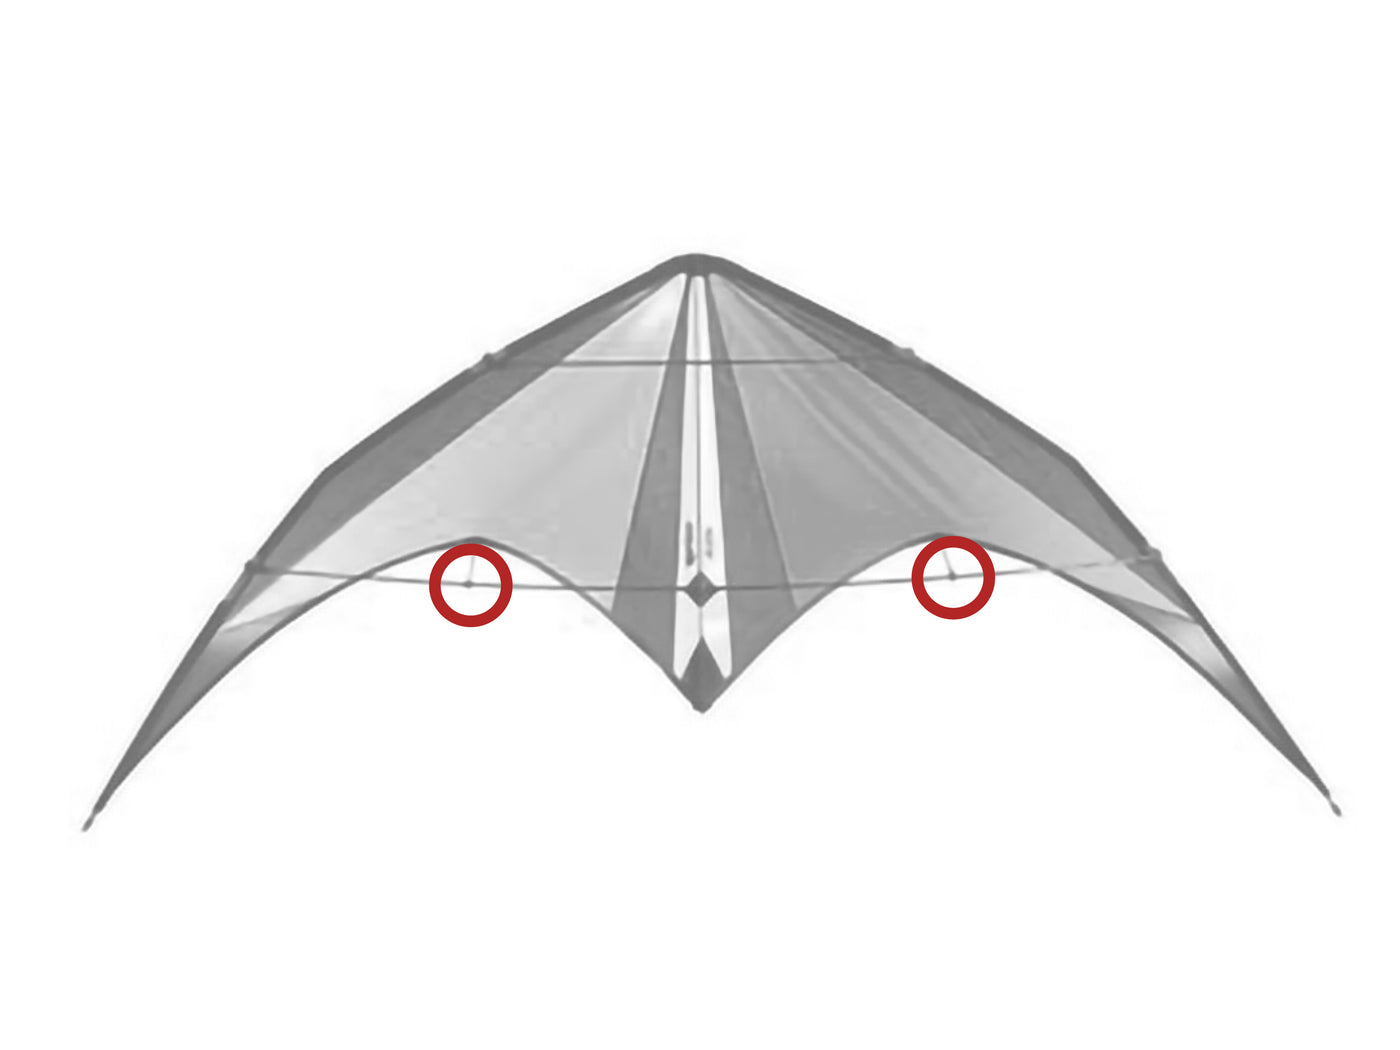 Diagram showing location of the Alien Standoff Fittings on the kite.